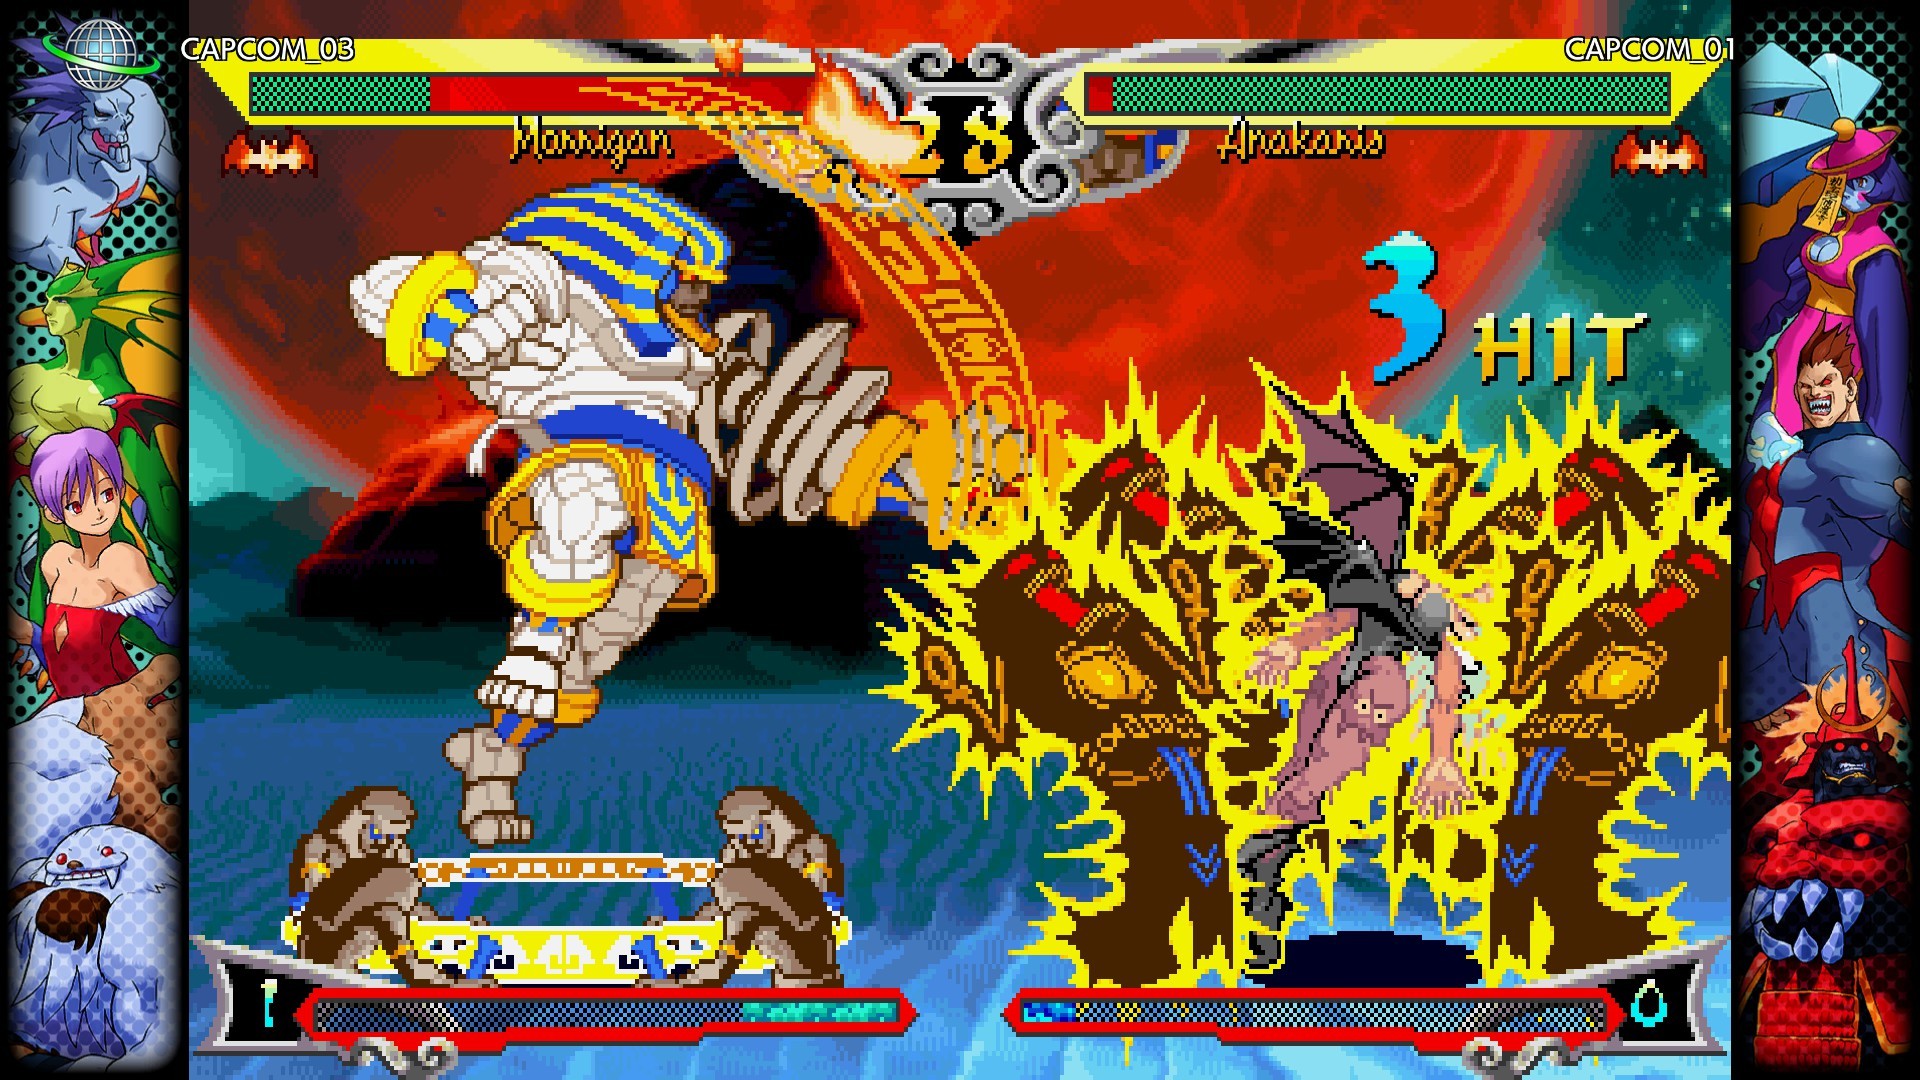 Capcom Fighting Collection Steam Altergift